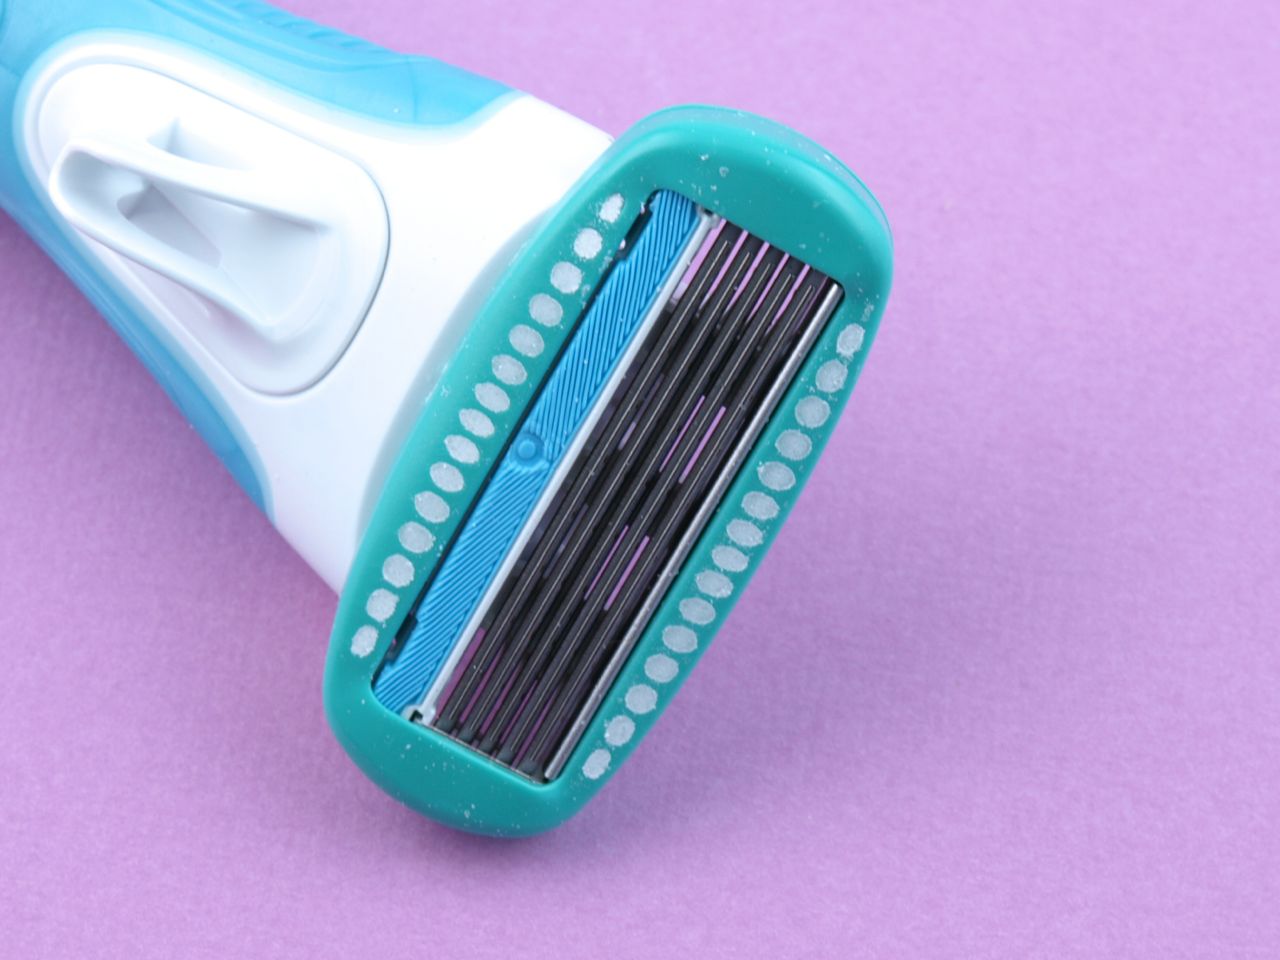 schick electric trimmer